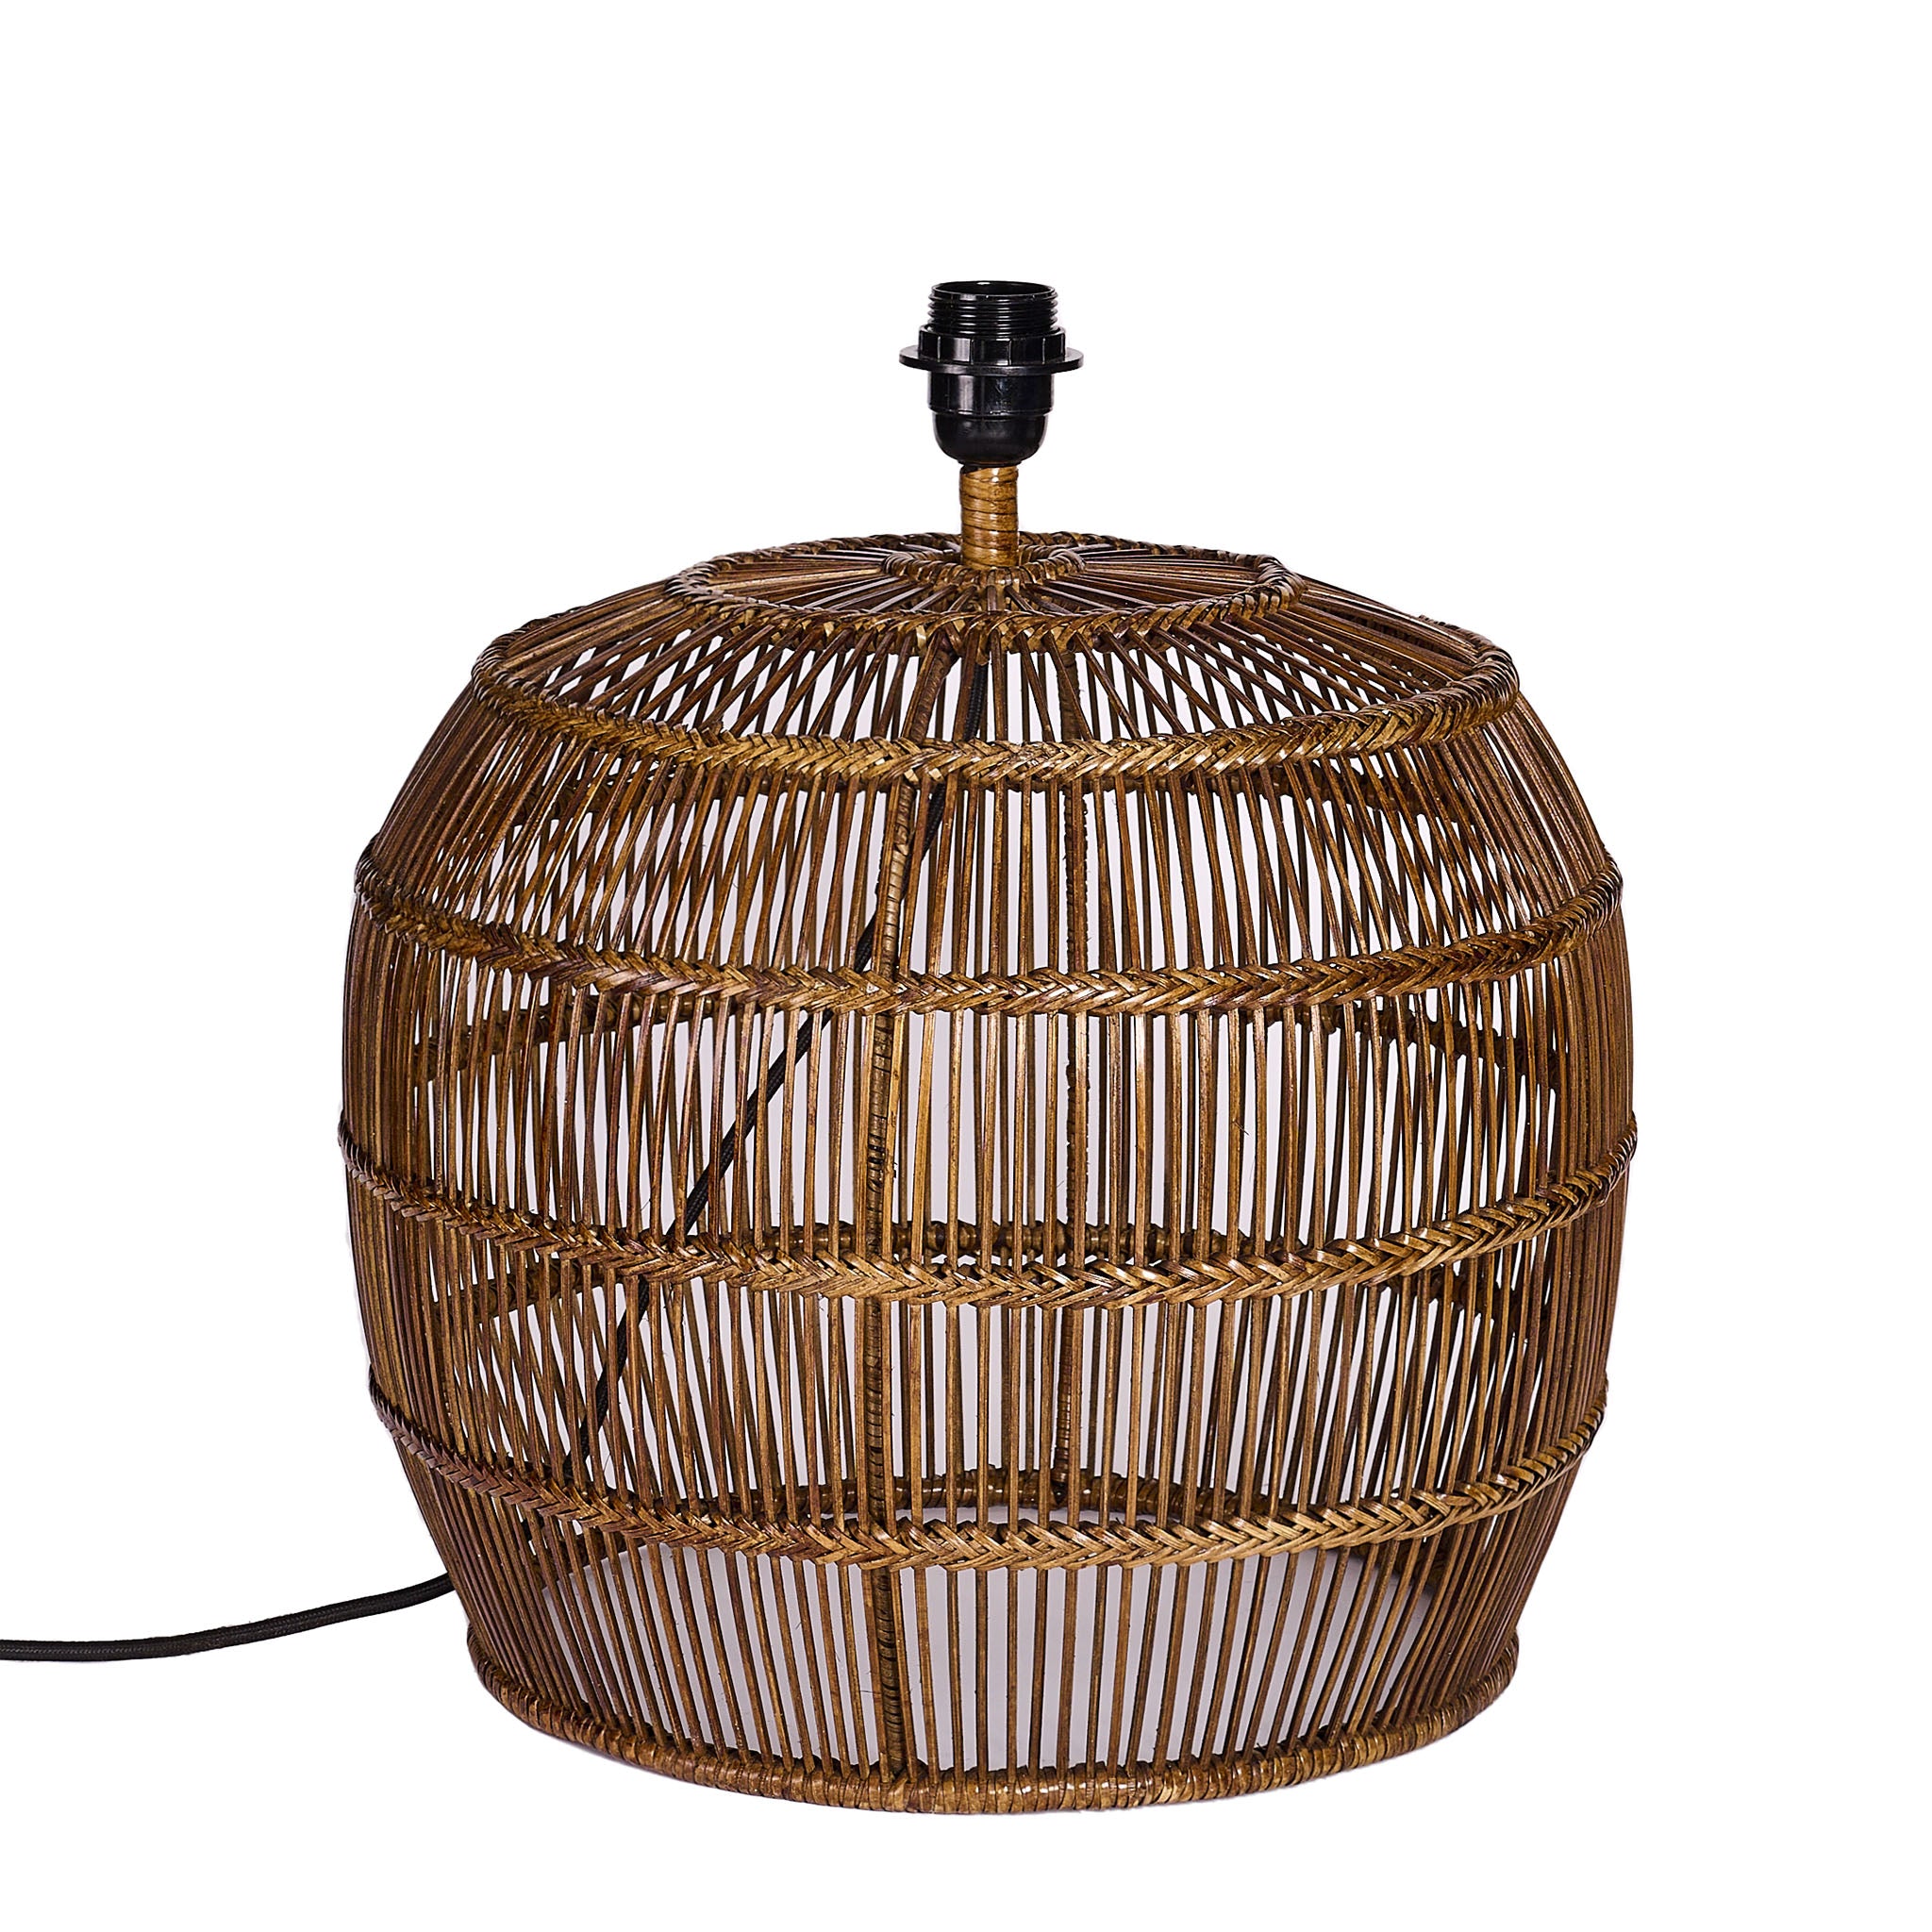 Lamp base in rattan and bamboo